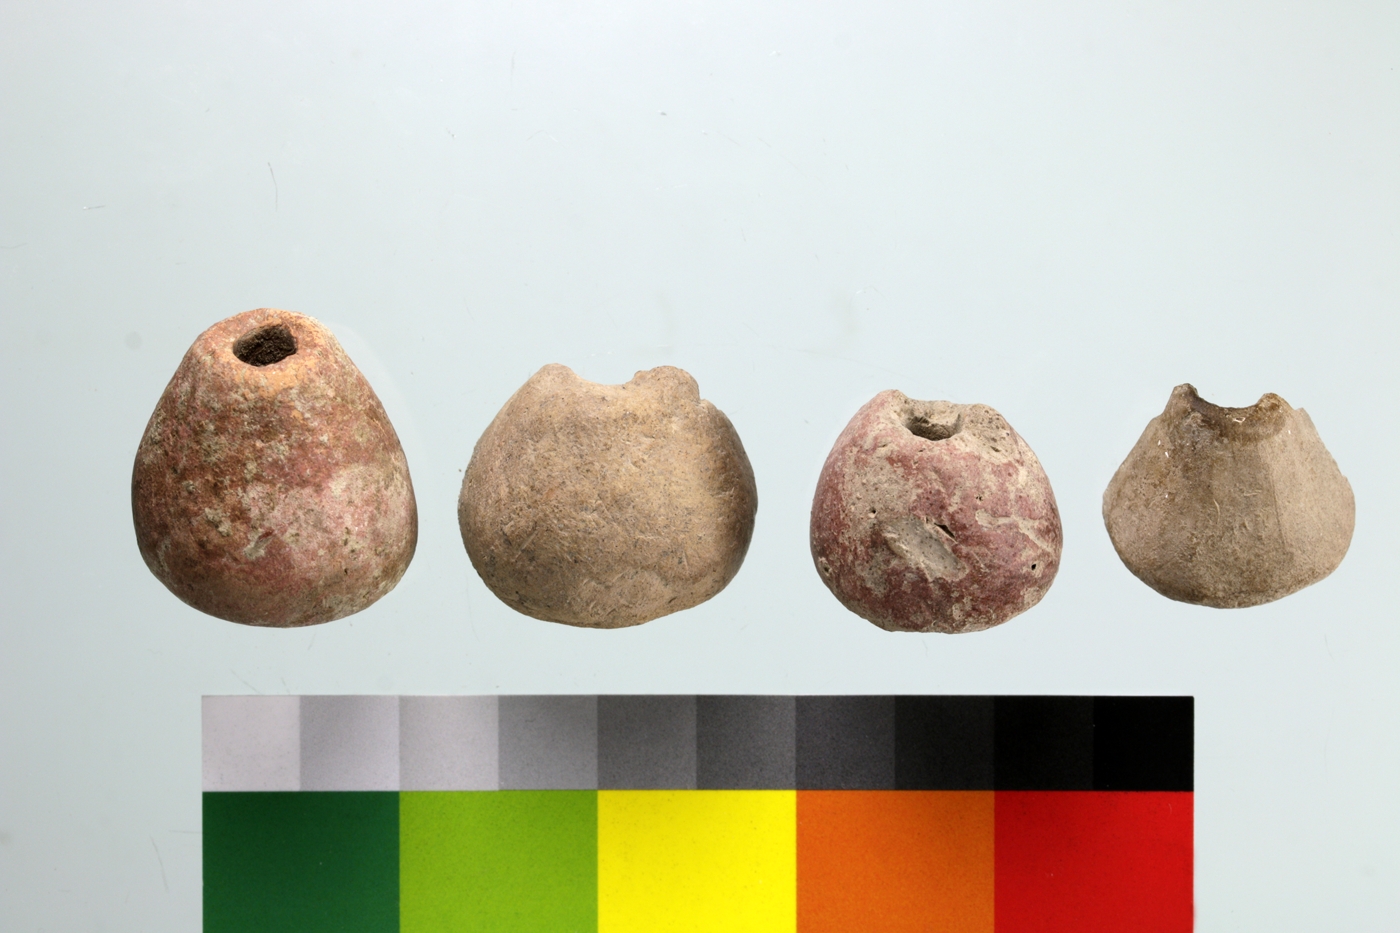 Conical spindle whorls showing variation in size and shape. Note that they are not always symmetrical